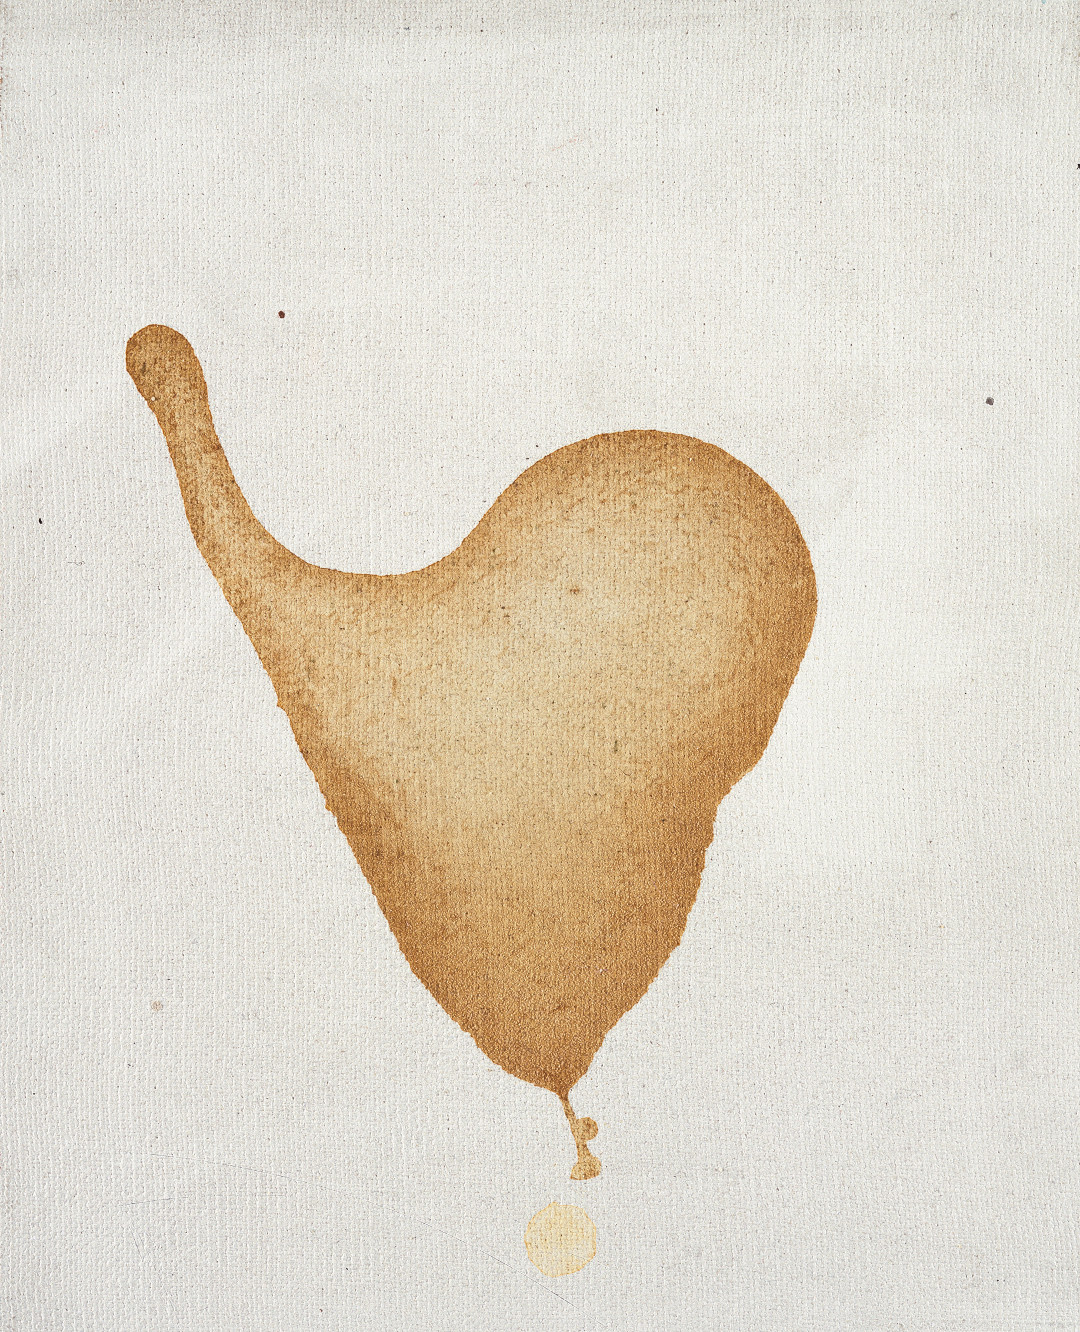 Andy Warhol, Cum, 1977–78, semen on cotton, 10 x 8 inches, 25.4 x 20.3 cm. Picture credit:  The Andy Warhol Museum, Pittsburgh; Founding Collection, Contribution The Andy Warhol Foundation for the Visual Arts, Inc. ©The Andy Warhol Foundation for the Visual Arts, Inc., NY, Photo:  Phillips/Schwarb 